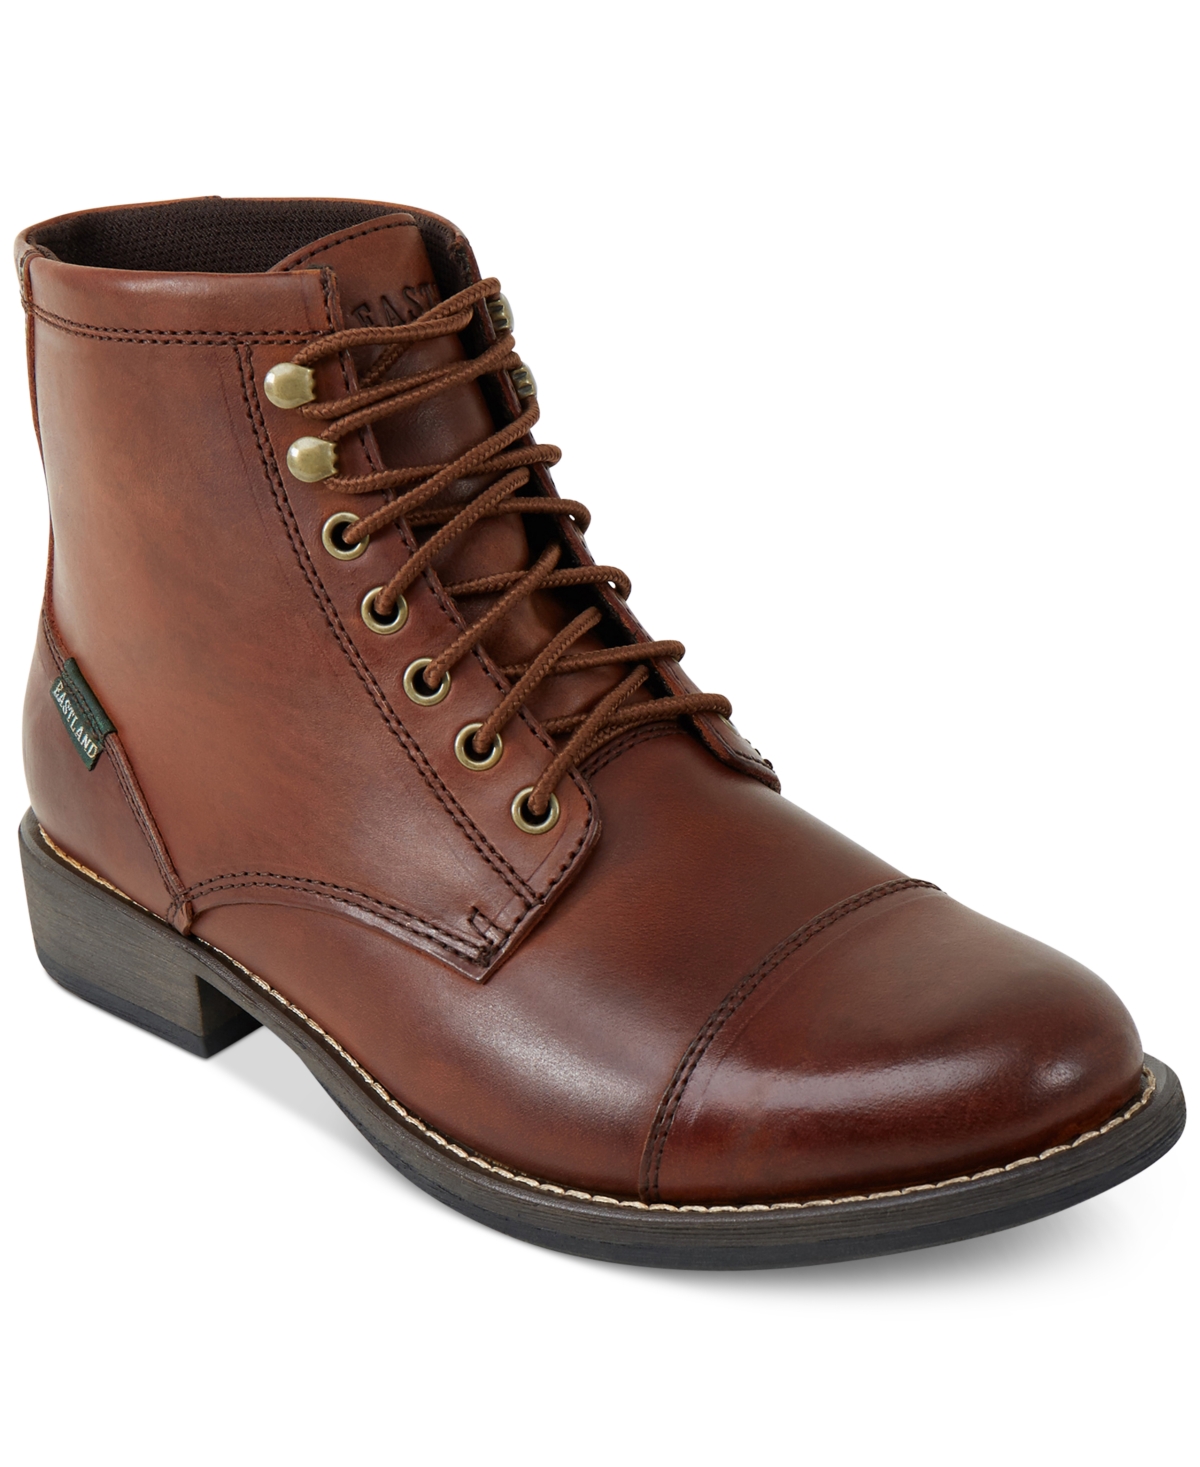 Eastland High Fidelity Lace-Up Boots - Tan